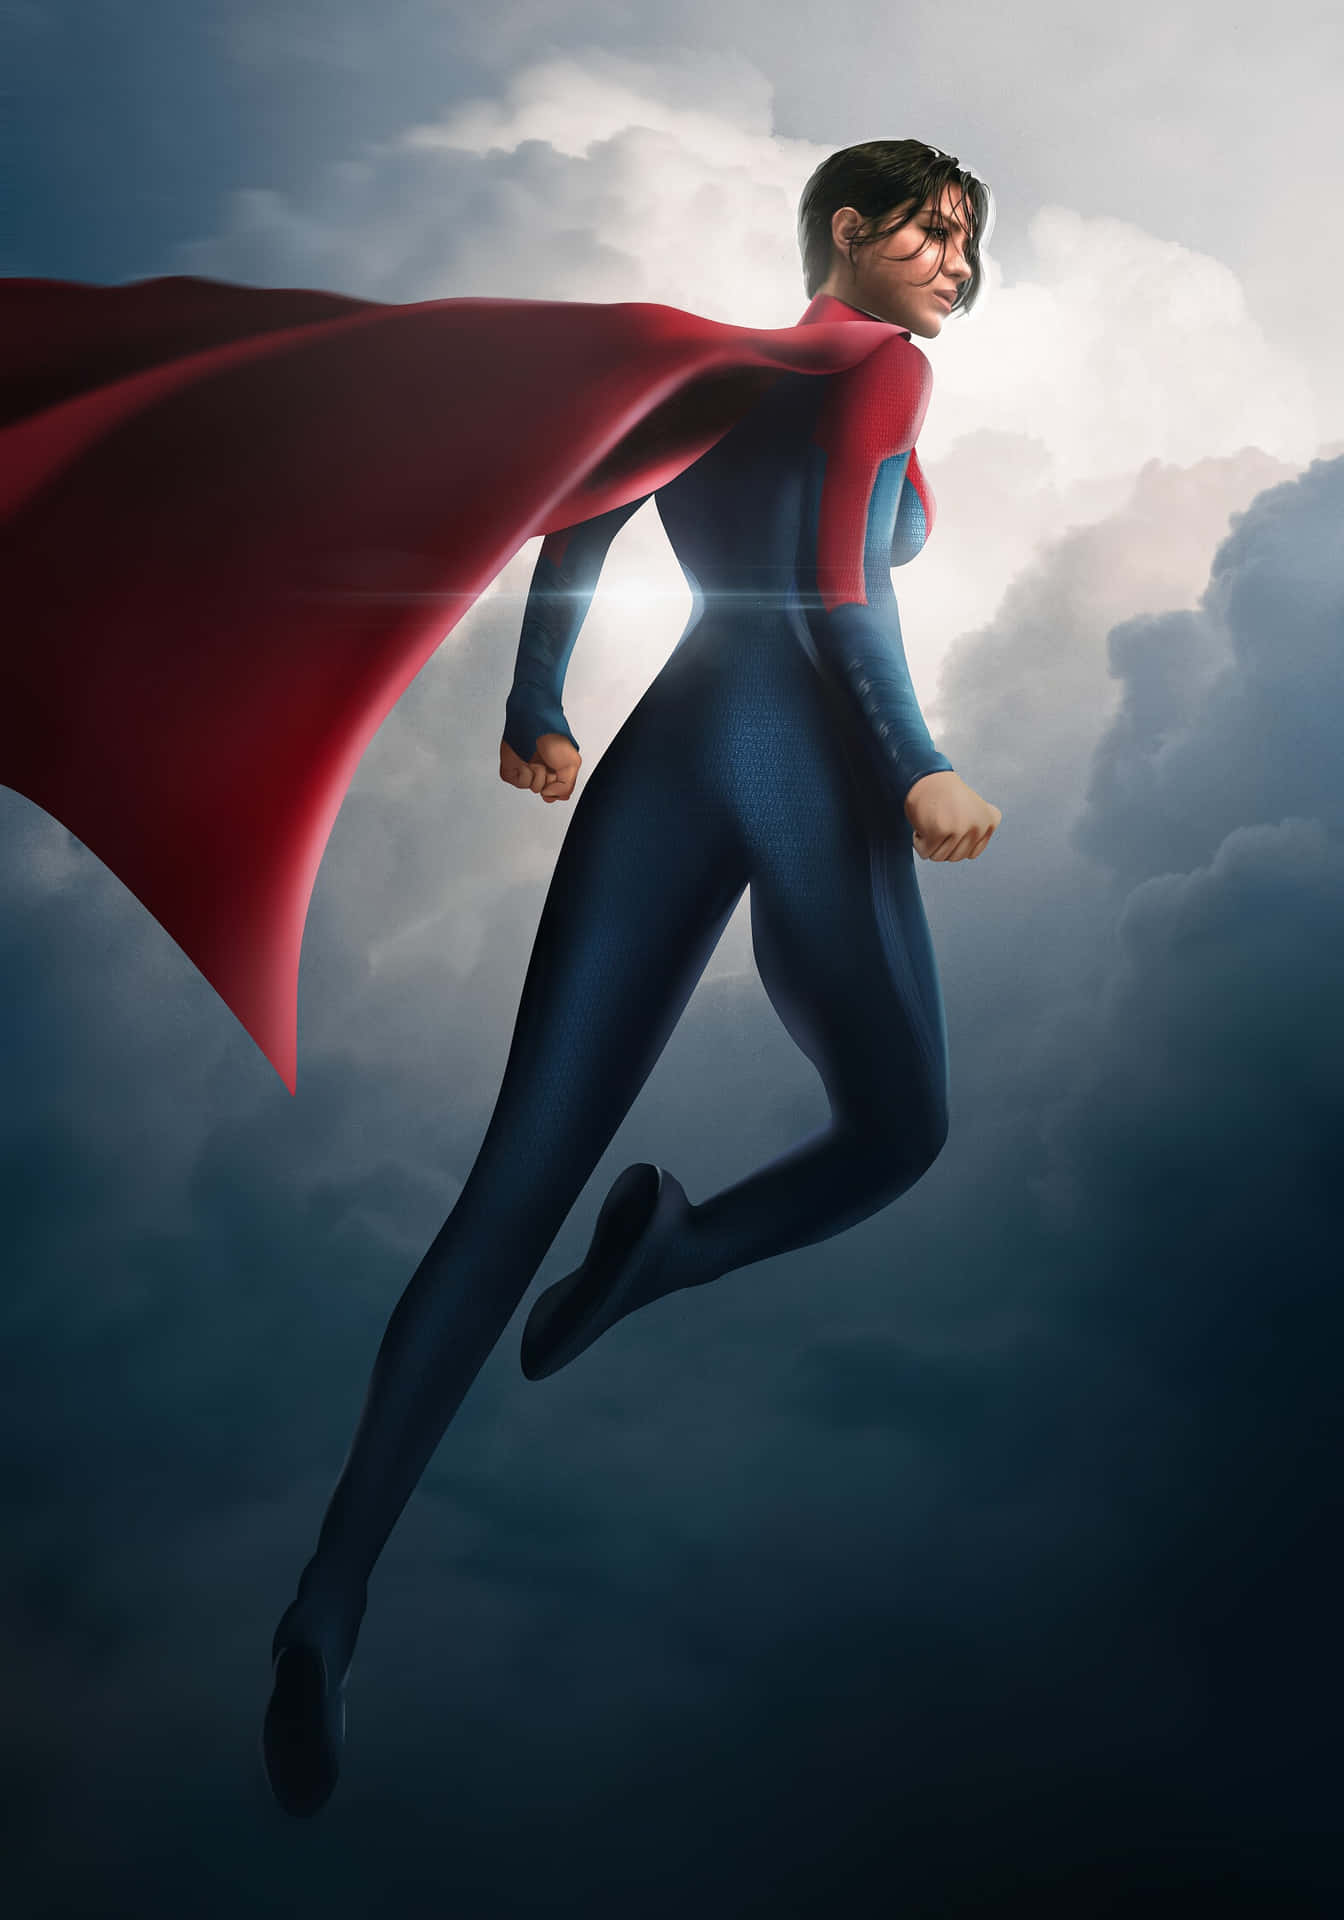 Supergirl Flying Above Clouds Wallpaper